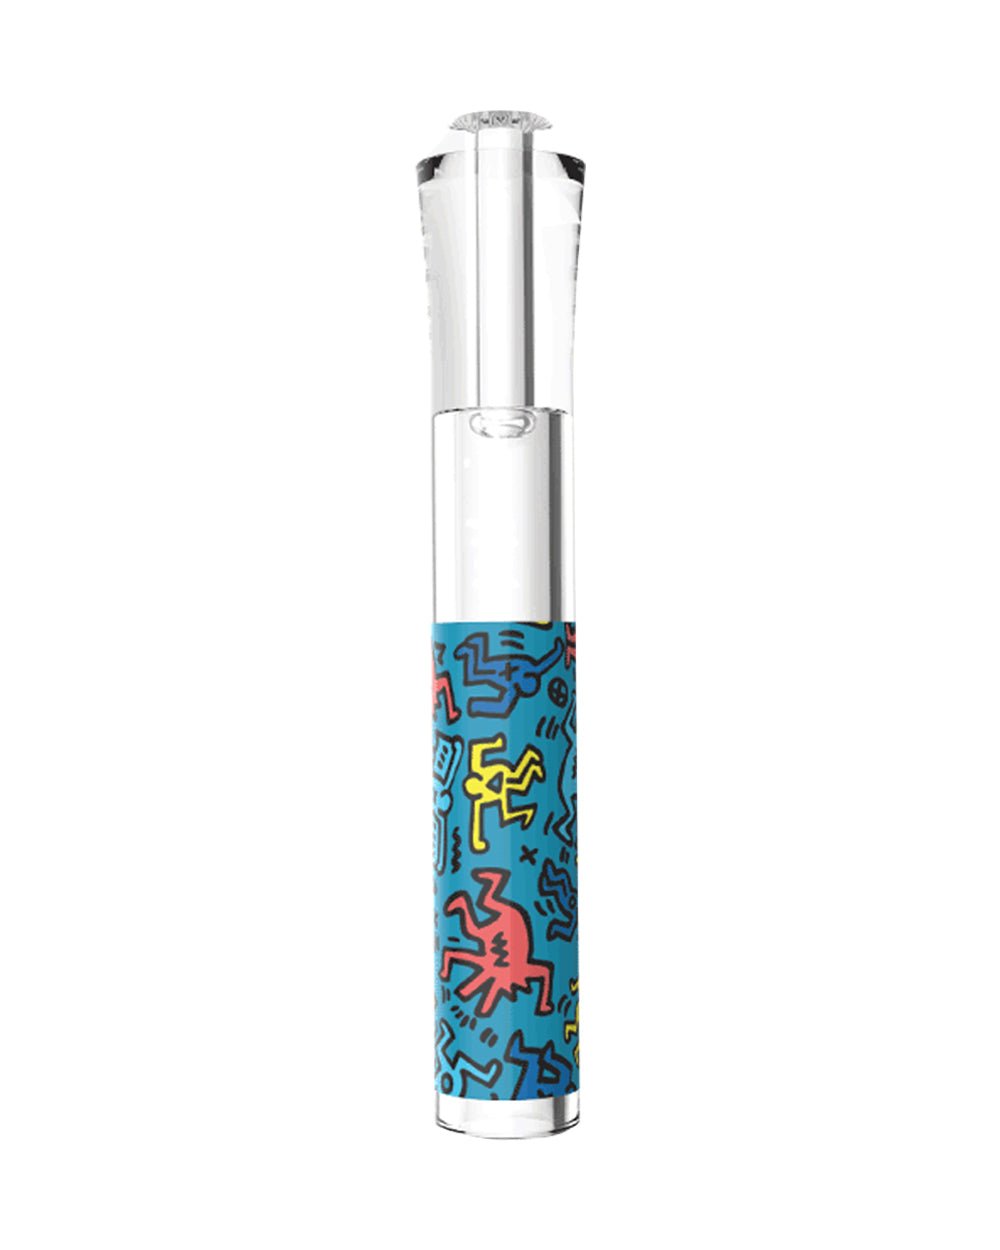 Keith Haring | Glass Taster Chillum Hand Pipe | 3in Long - Glass - Black & White - 3